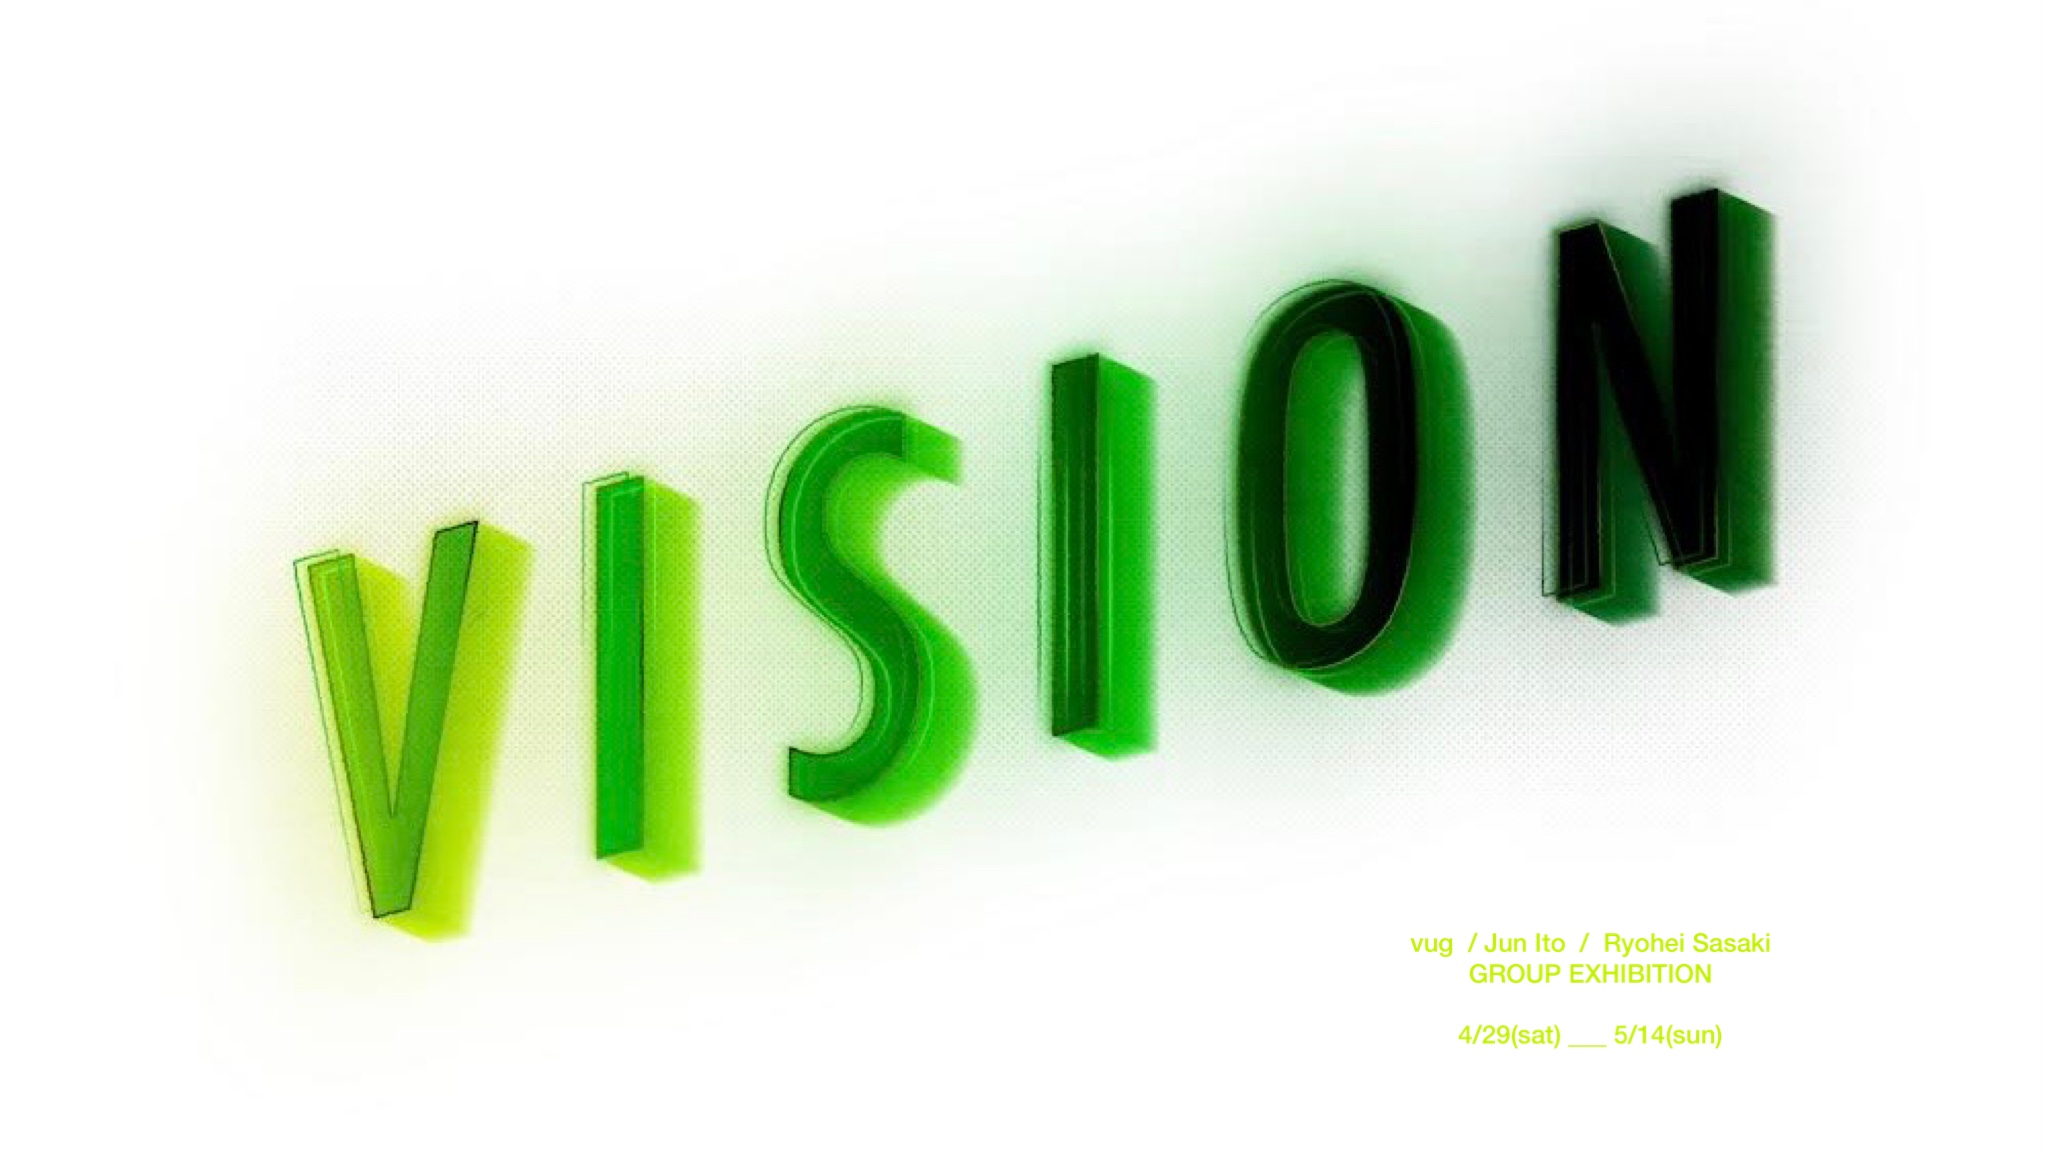 GROUP EXHIBITION “ VISION “